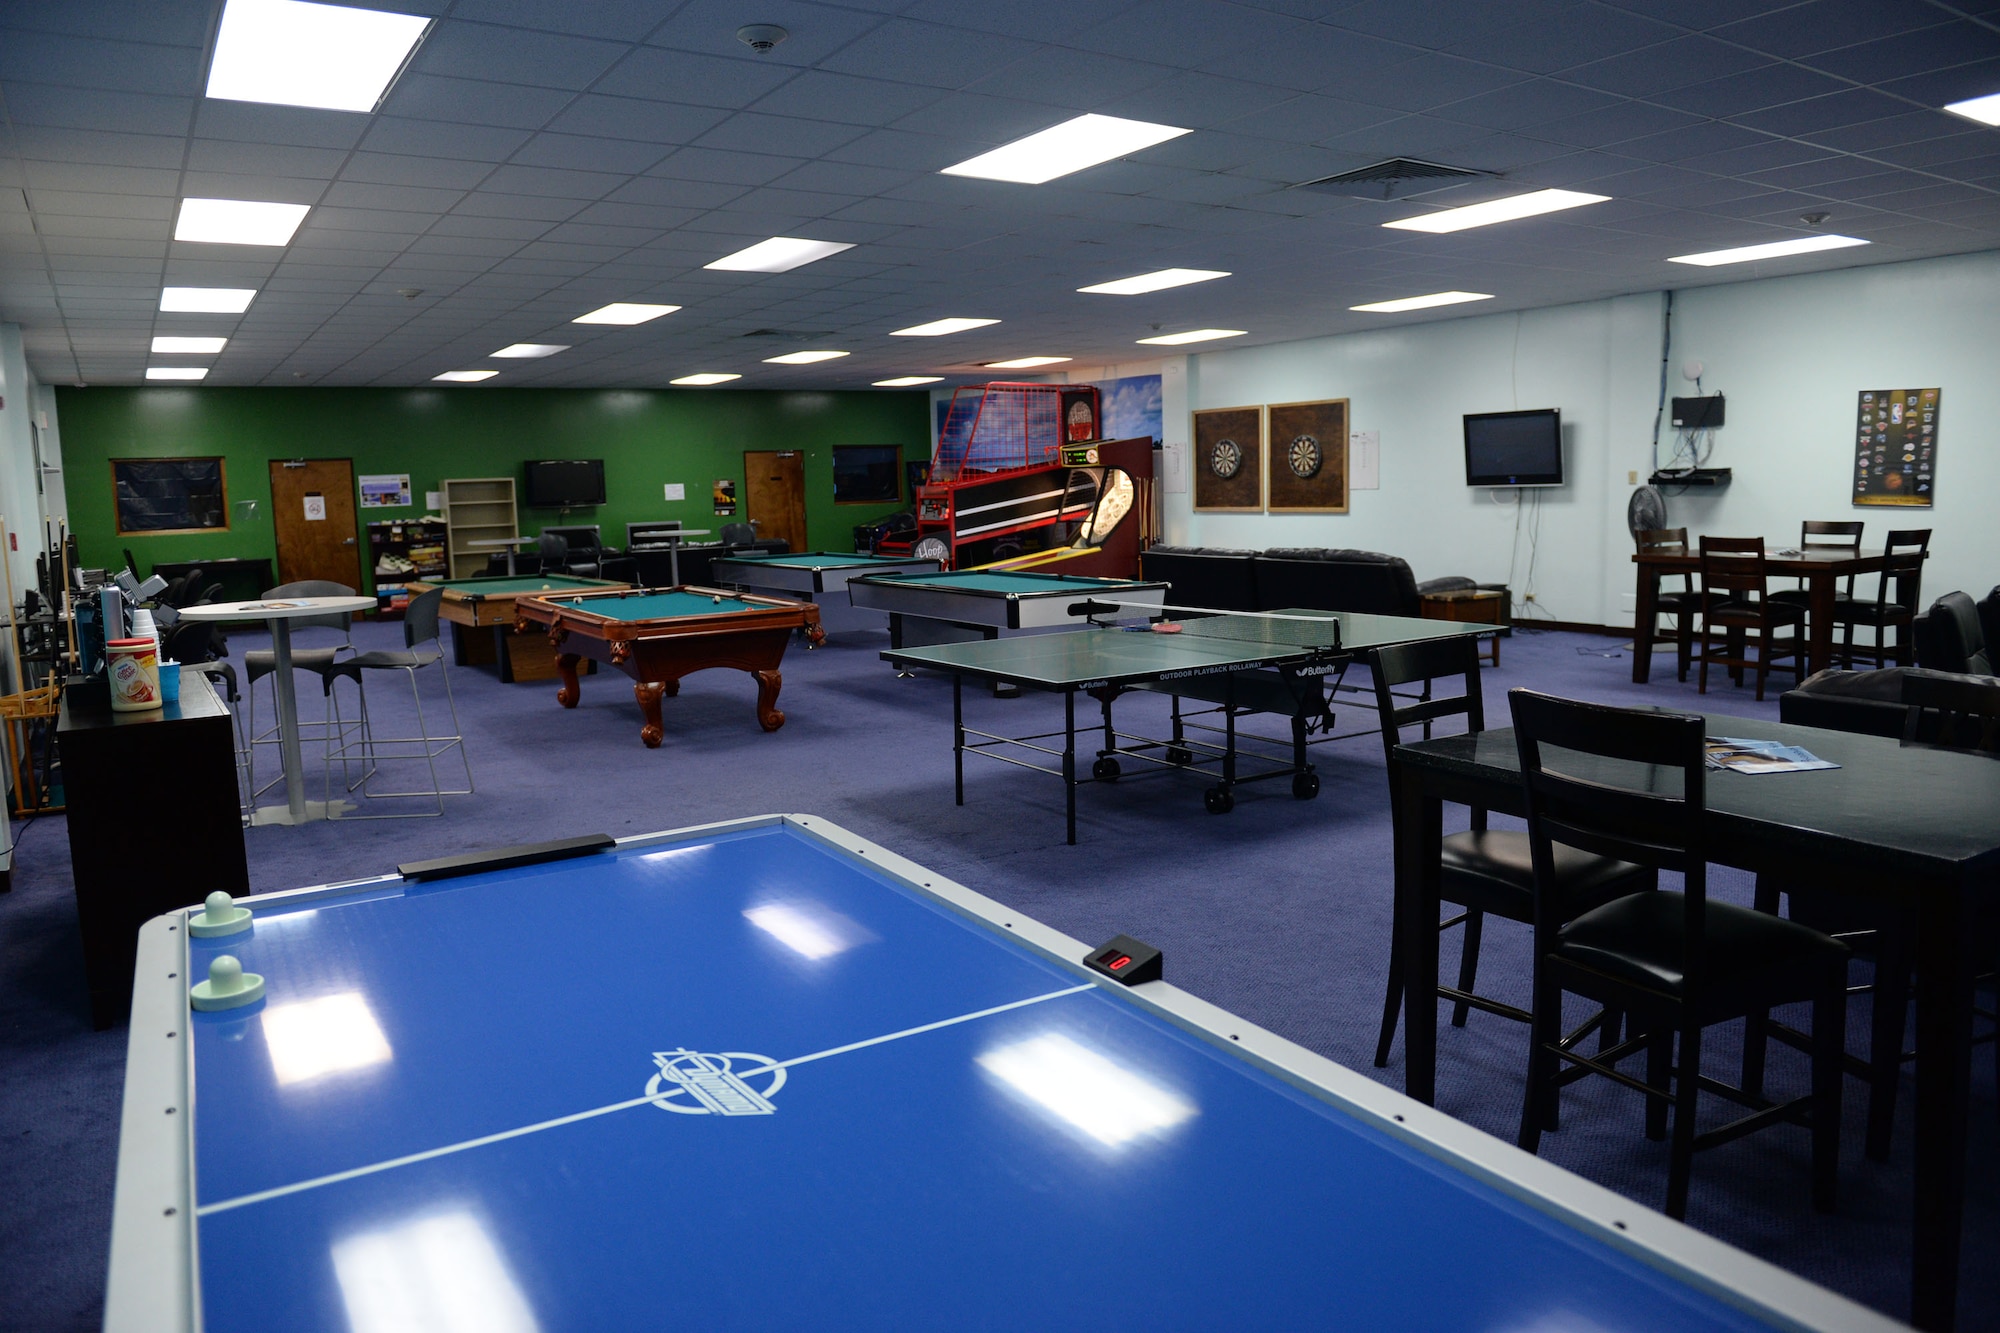 The Hot Spot has pingpong tables, pool tables, video game systems and a music room for avid musicians. Located in Bldg. 25005 next to the bowling center, the Hot Spot offers two sections, Airmen’s center and community center, for people to enjoy their time at Andersen Air Force Base and Guam. (U.S. Air Force photo by Airman 1st Class Joshua Smoot)